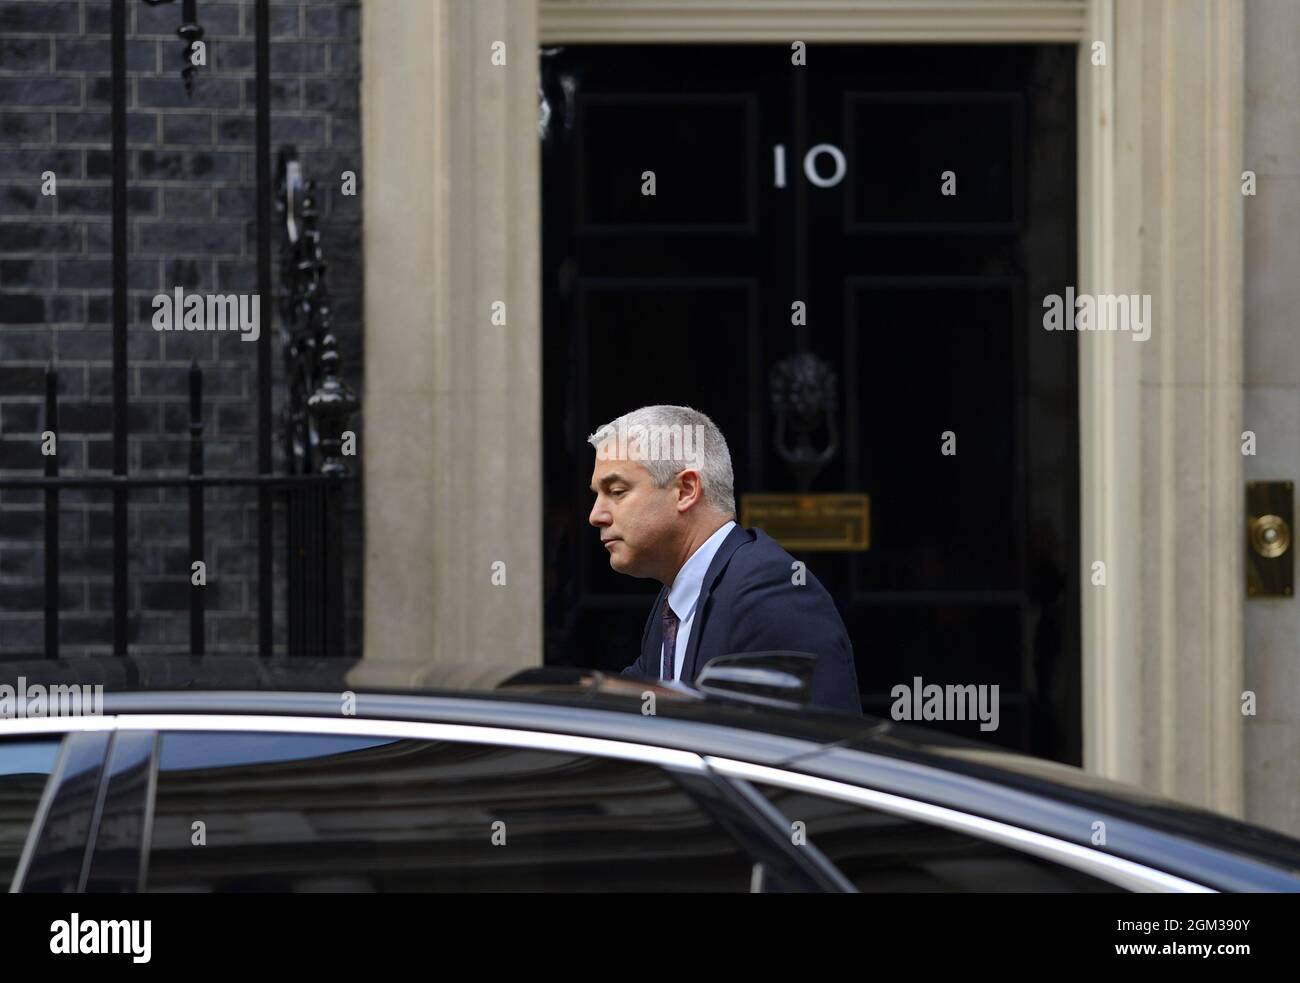 Steve Barclay MP arriving in Downing Street during a cabinet reshuffle in which he was appointed Chancellor of the Duchy of Lancaster and Minister f Stock Photo